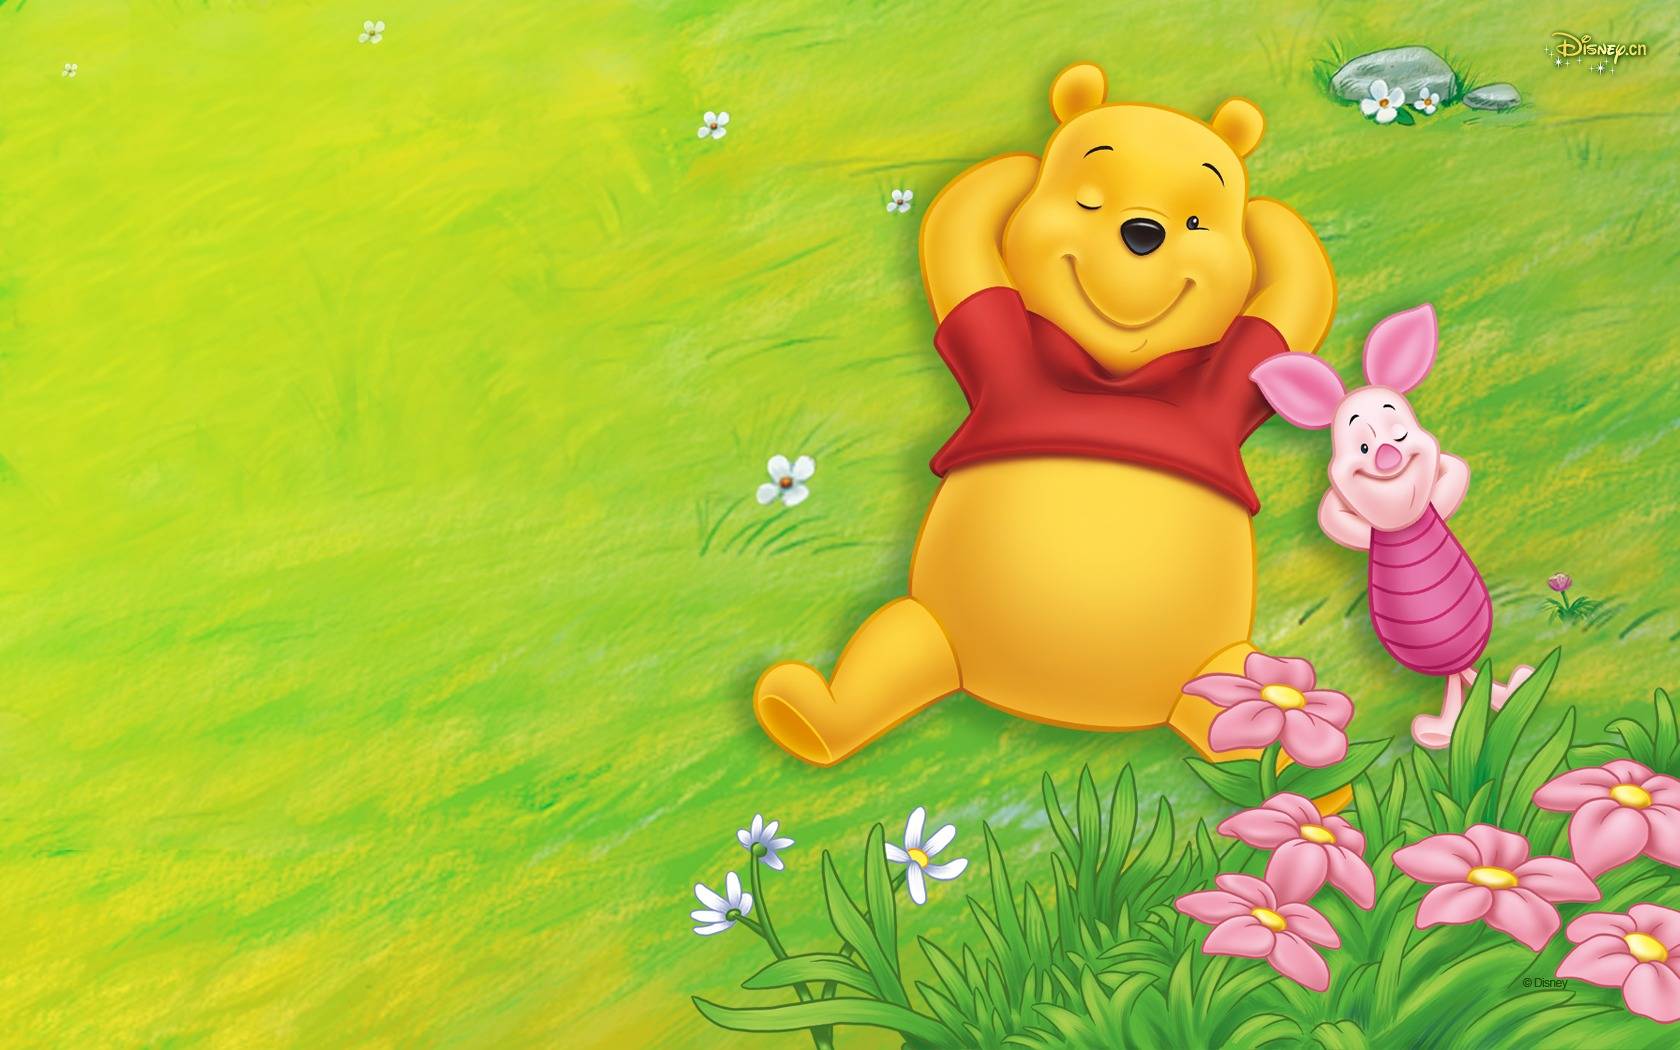 httpcar picturesfeedionetwinnie the pooh kids photo or wallpaper